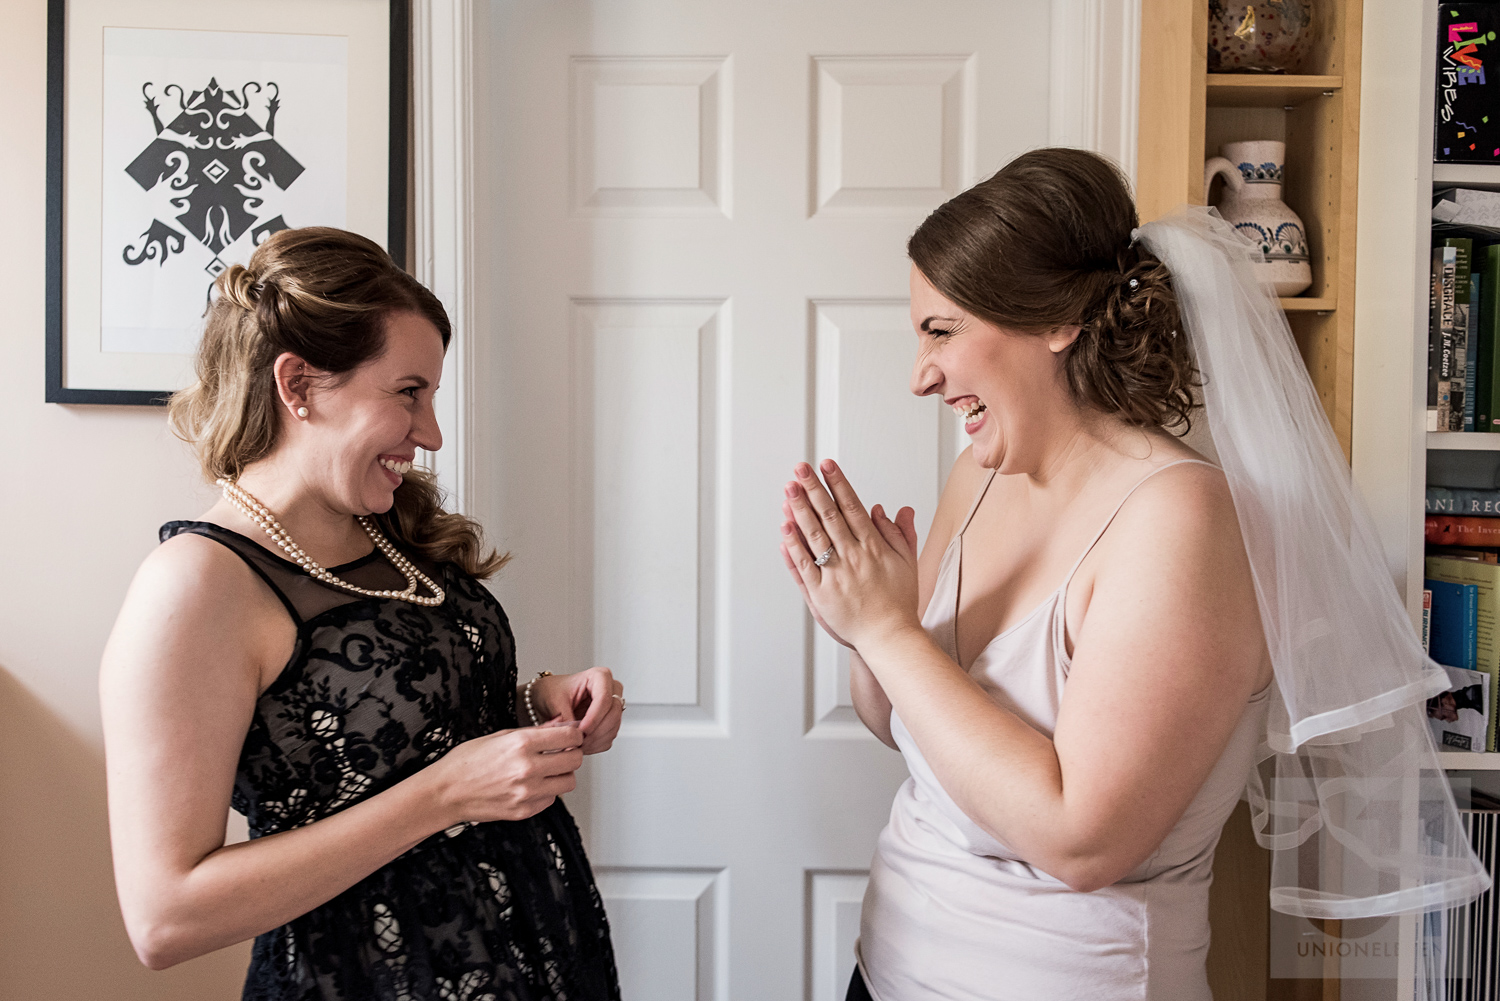 The bride and her bridesmaid sharing a laugh while they get ready